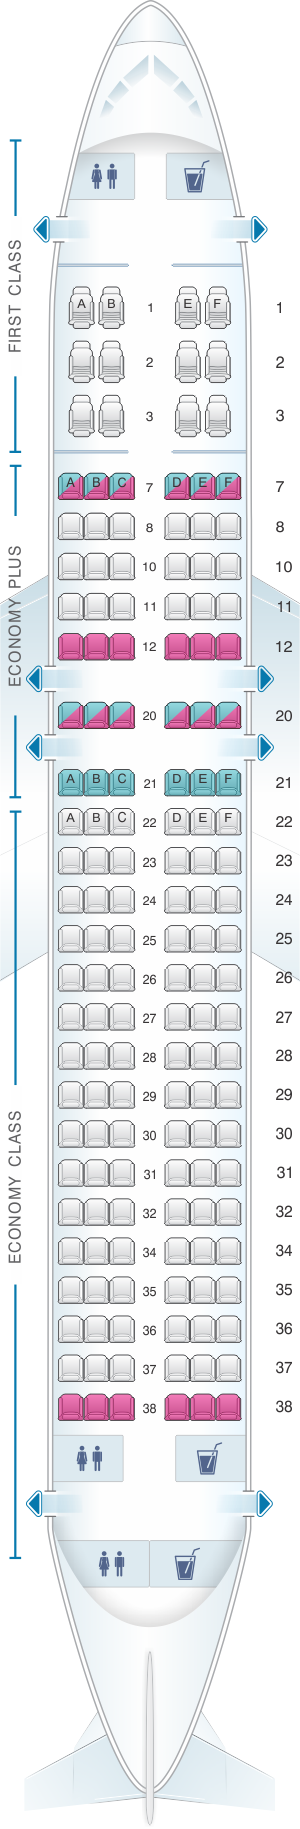 Seat map for United Airlines Airbus A320